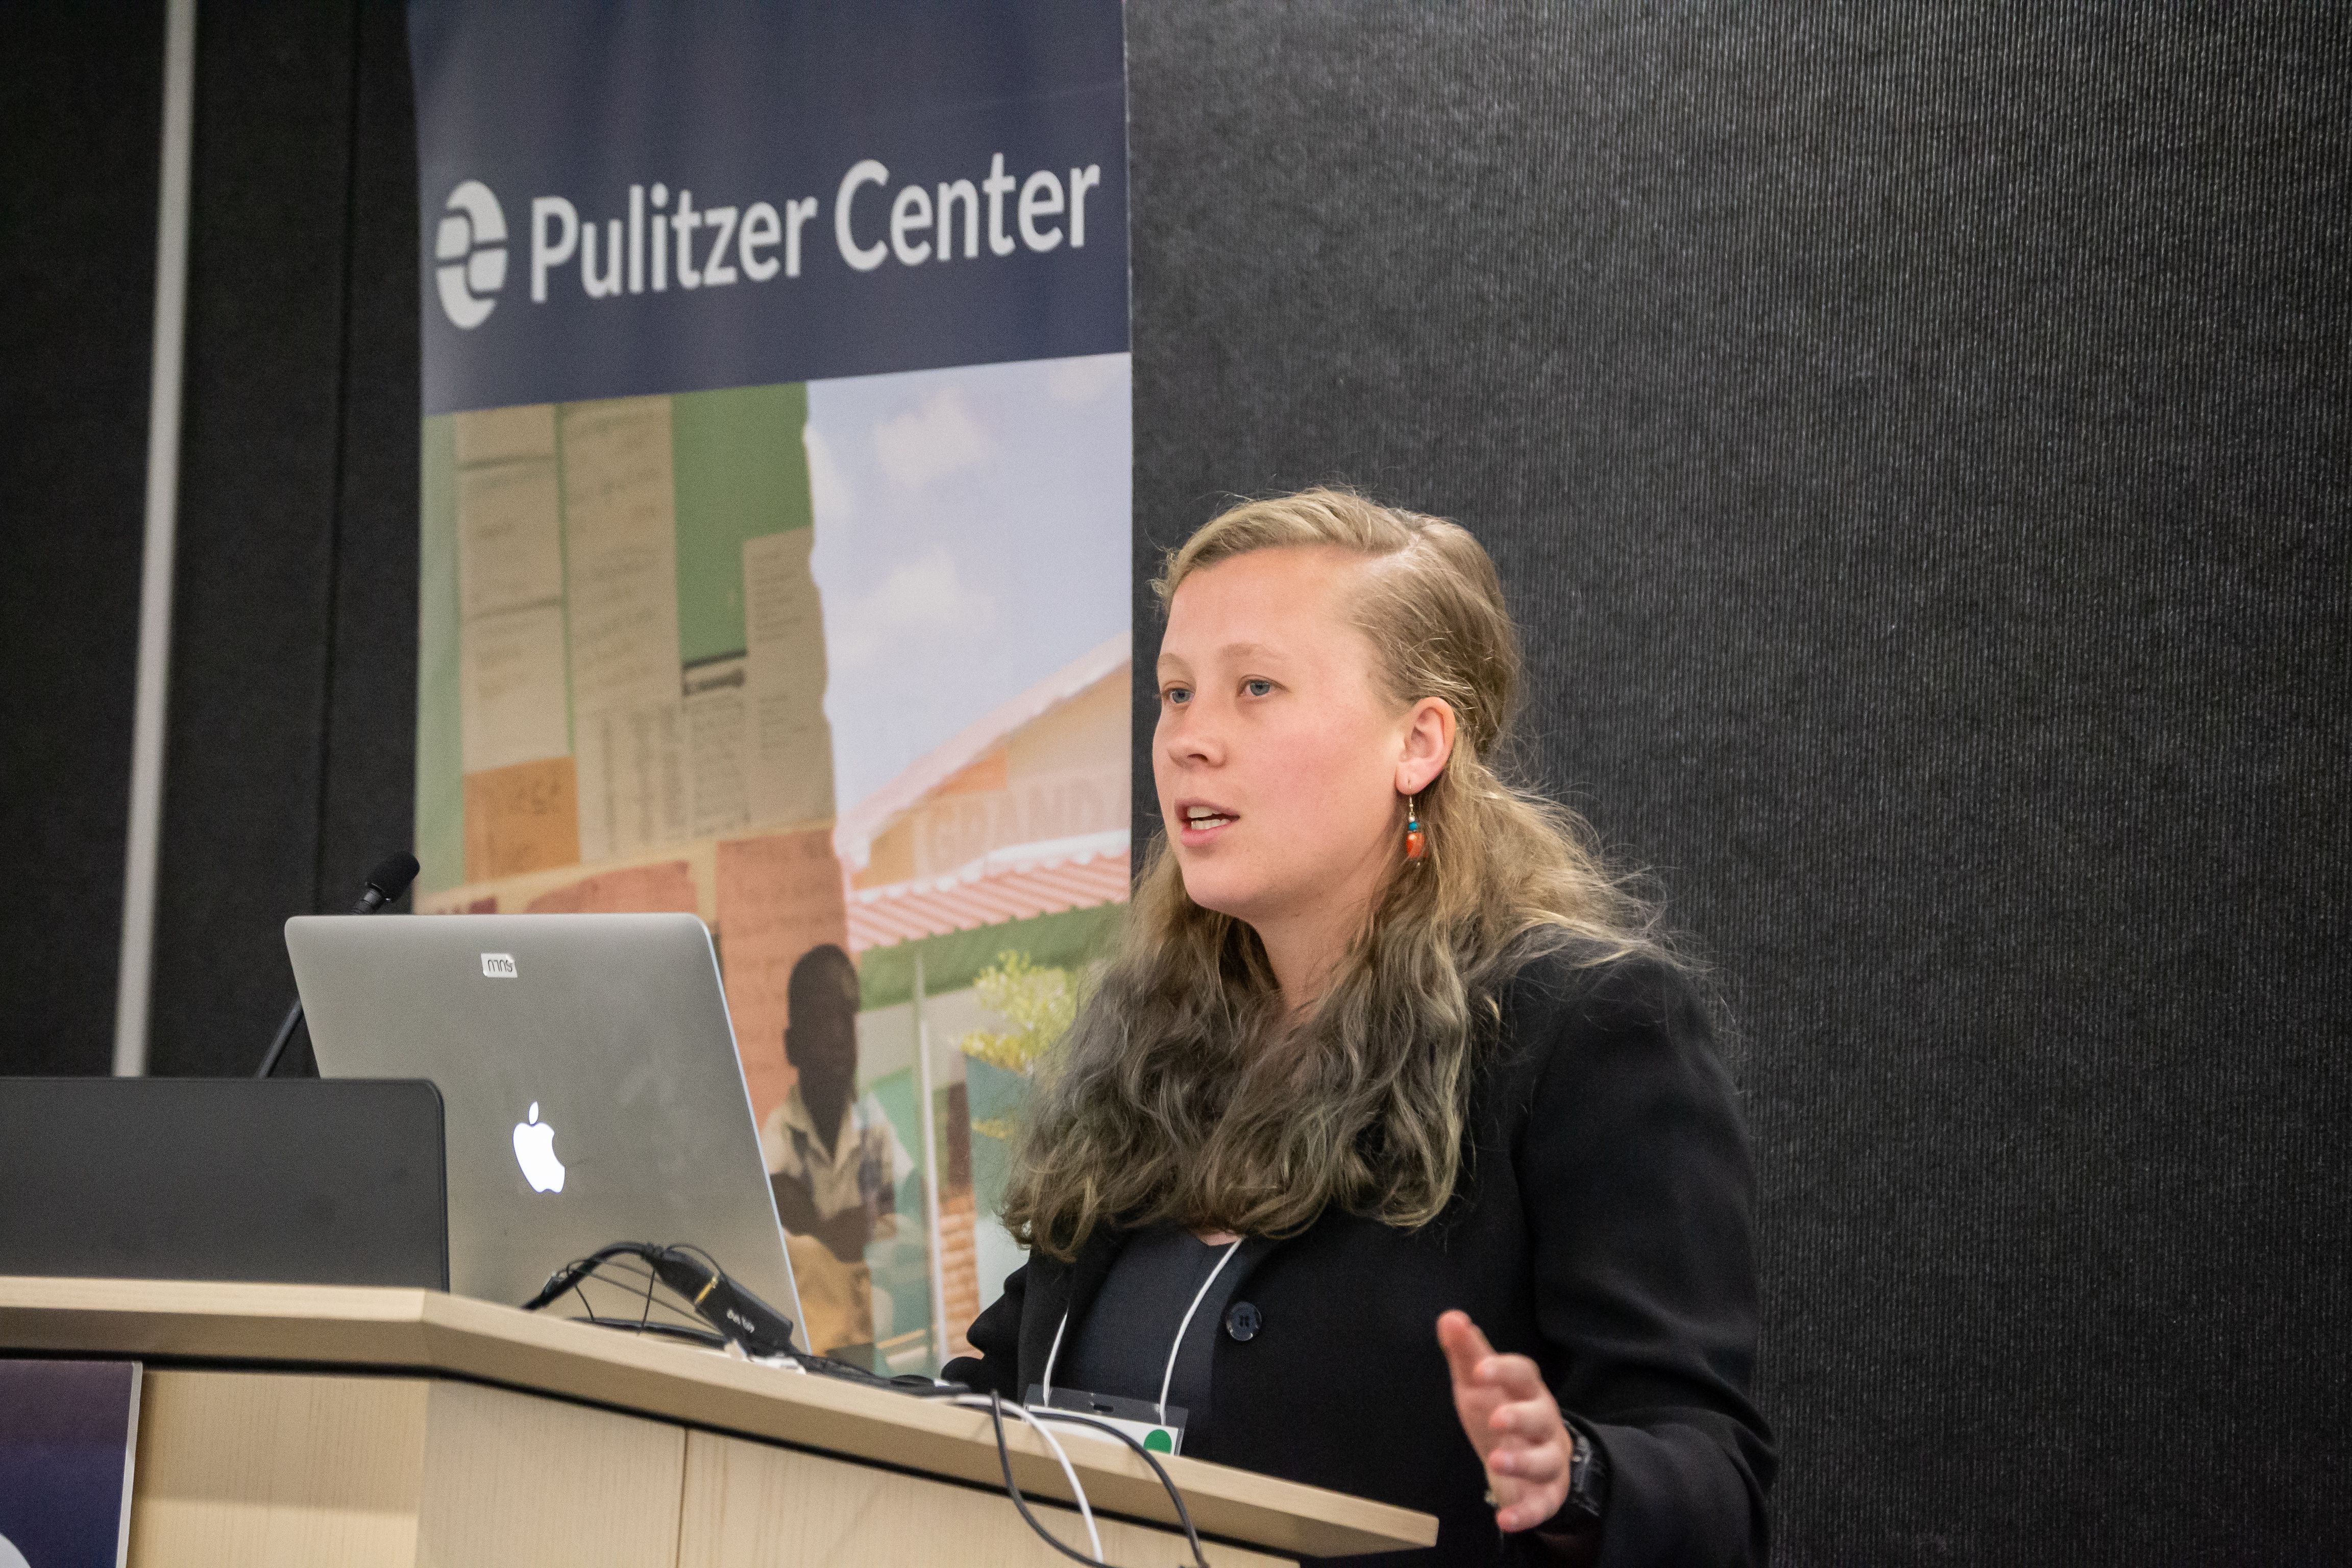 Emma Johnson from Yale University School of Forestry & Environmental Studies presents her findings on hydropower plants in Bhutan. Image by Nora Moraga-Lewy. United States, 2019.